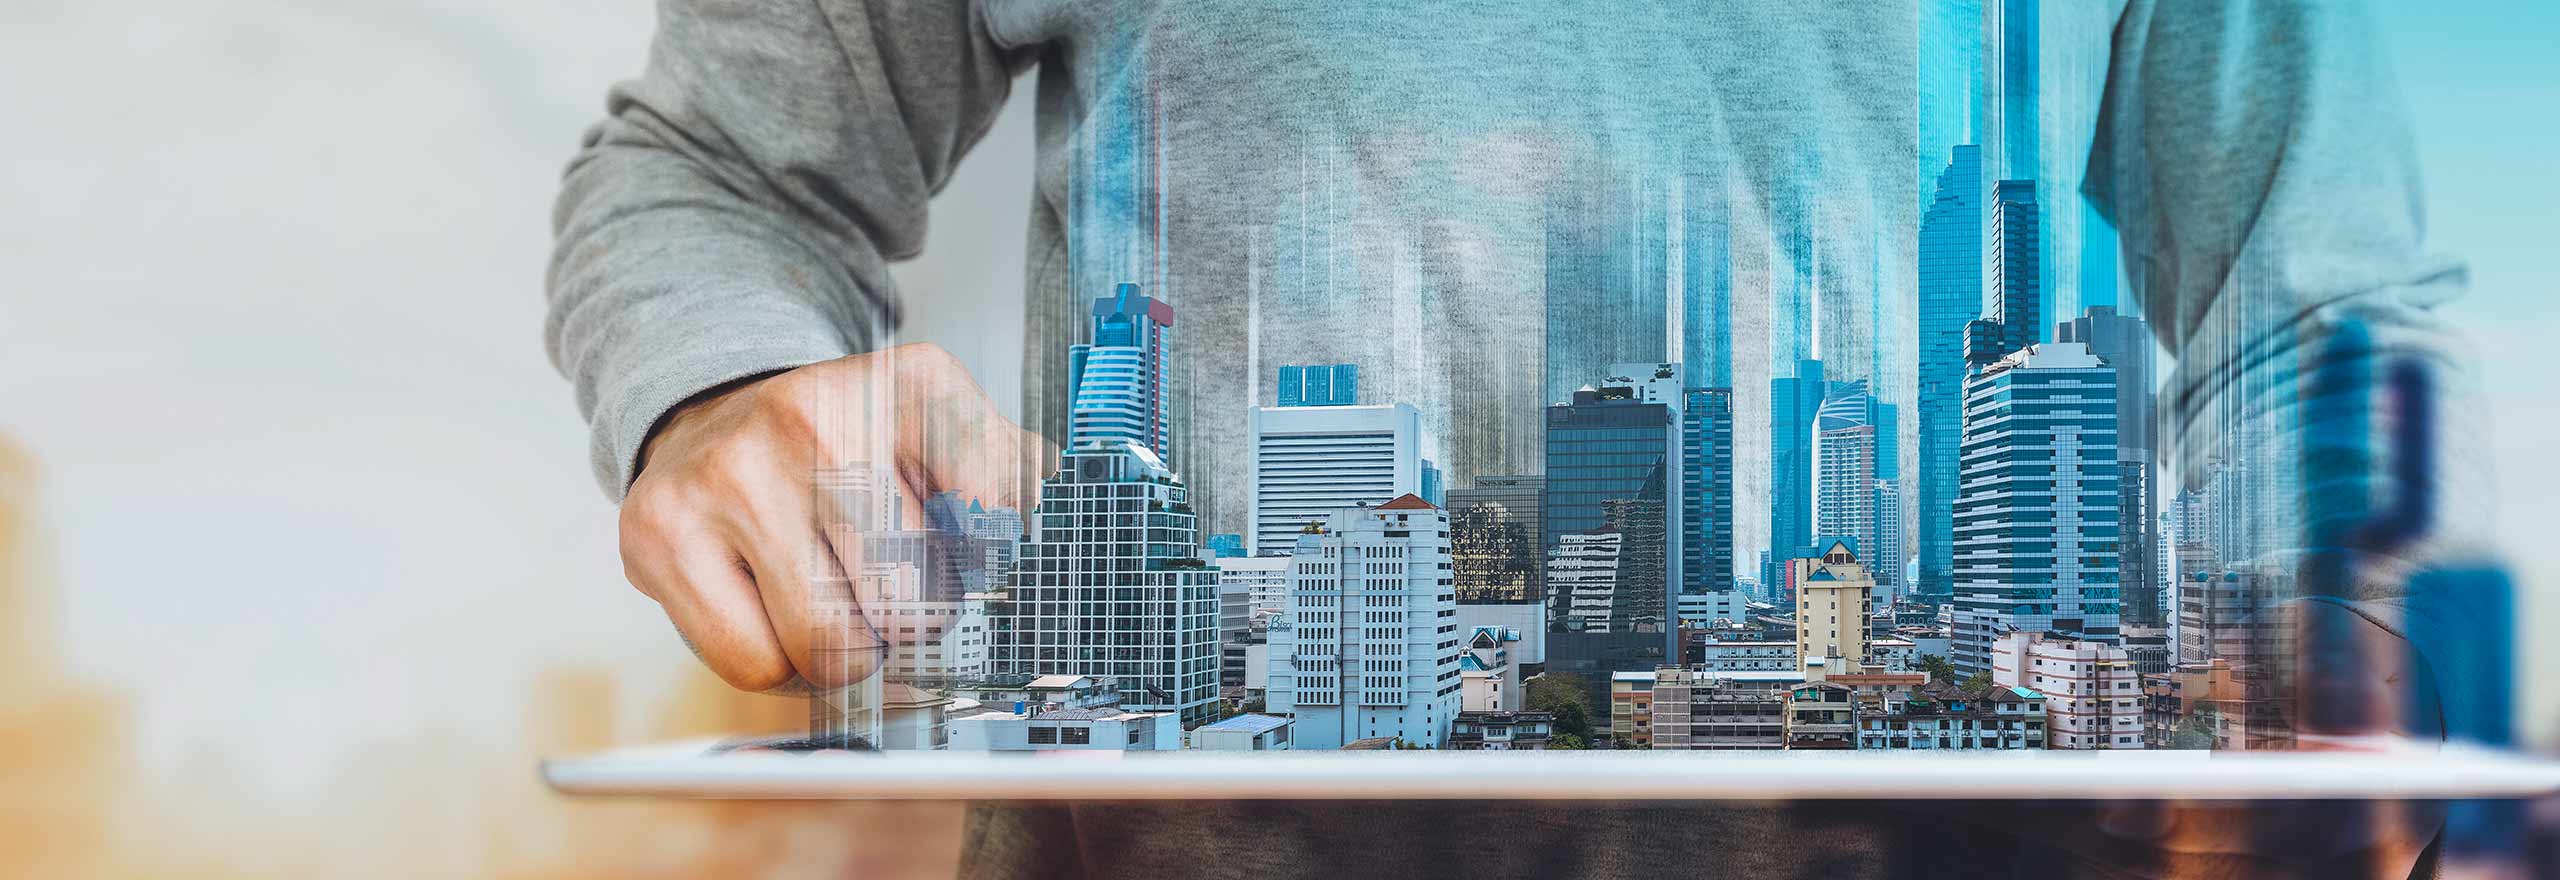 Composite image of a person overlooking a landscape comprised of commercial real estate